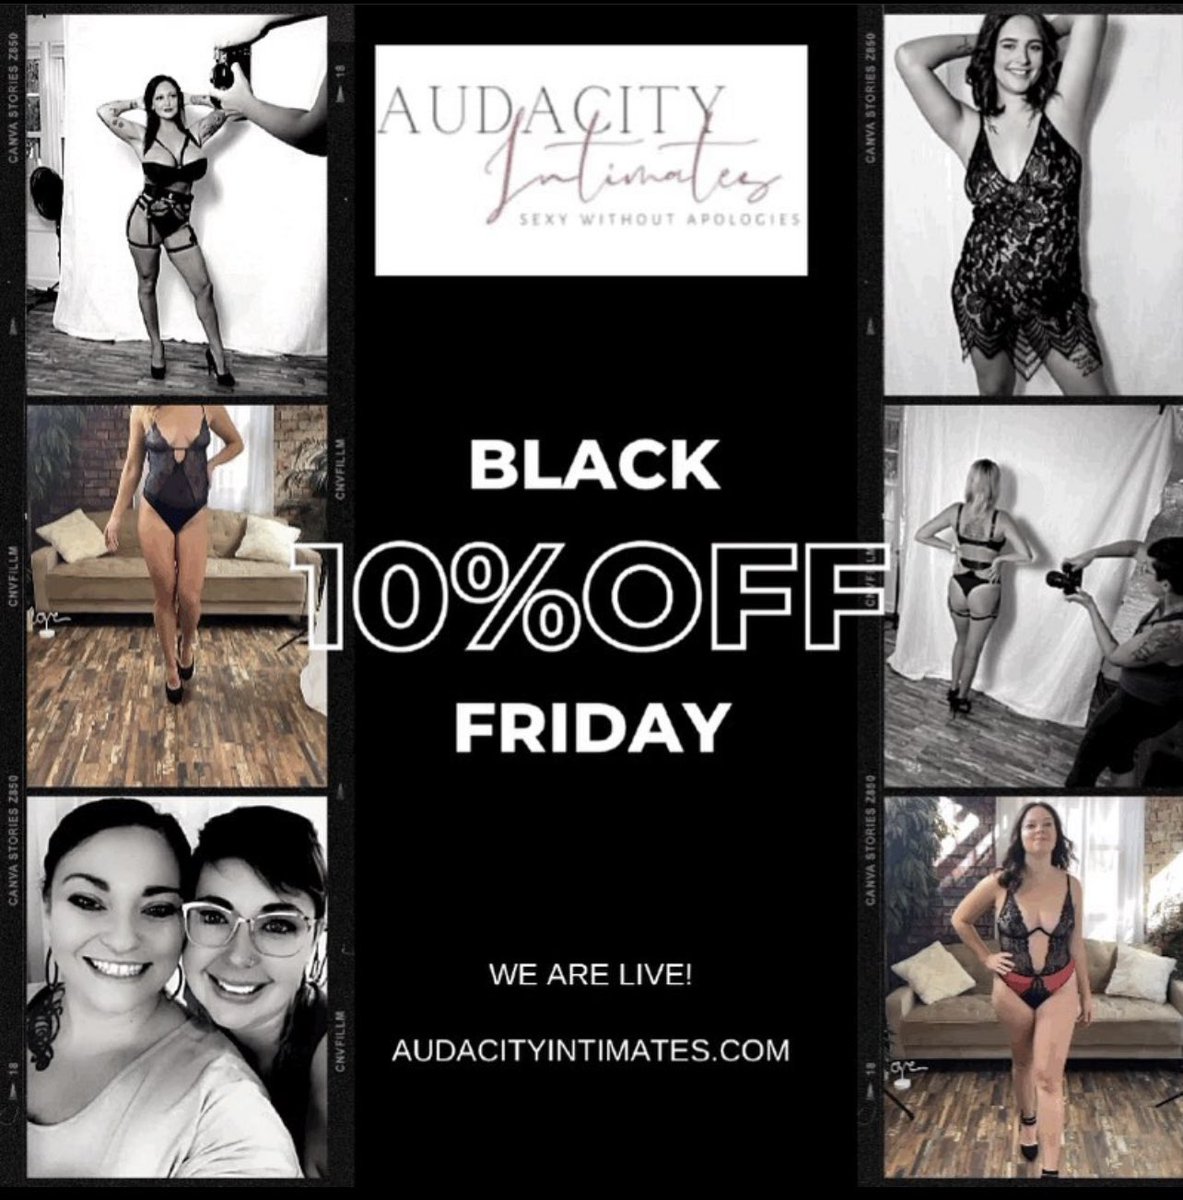 Check us out!!!!!!! We are finally launched & live 🖤All sizes (until sold out).Thank you guys for all your support. So much more coming, events, shoots & shenanigans 😘 Stay tuned! #blackfridaysale #SmallBusinessSaturday #BlackFridayDeals #audacityintimates